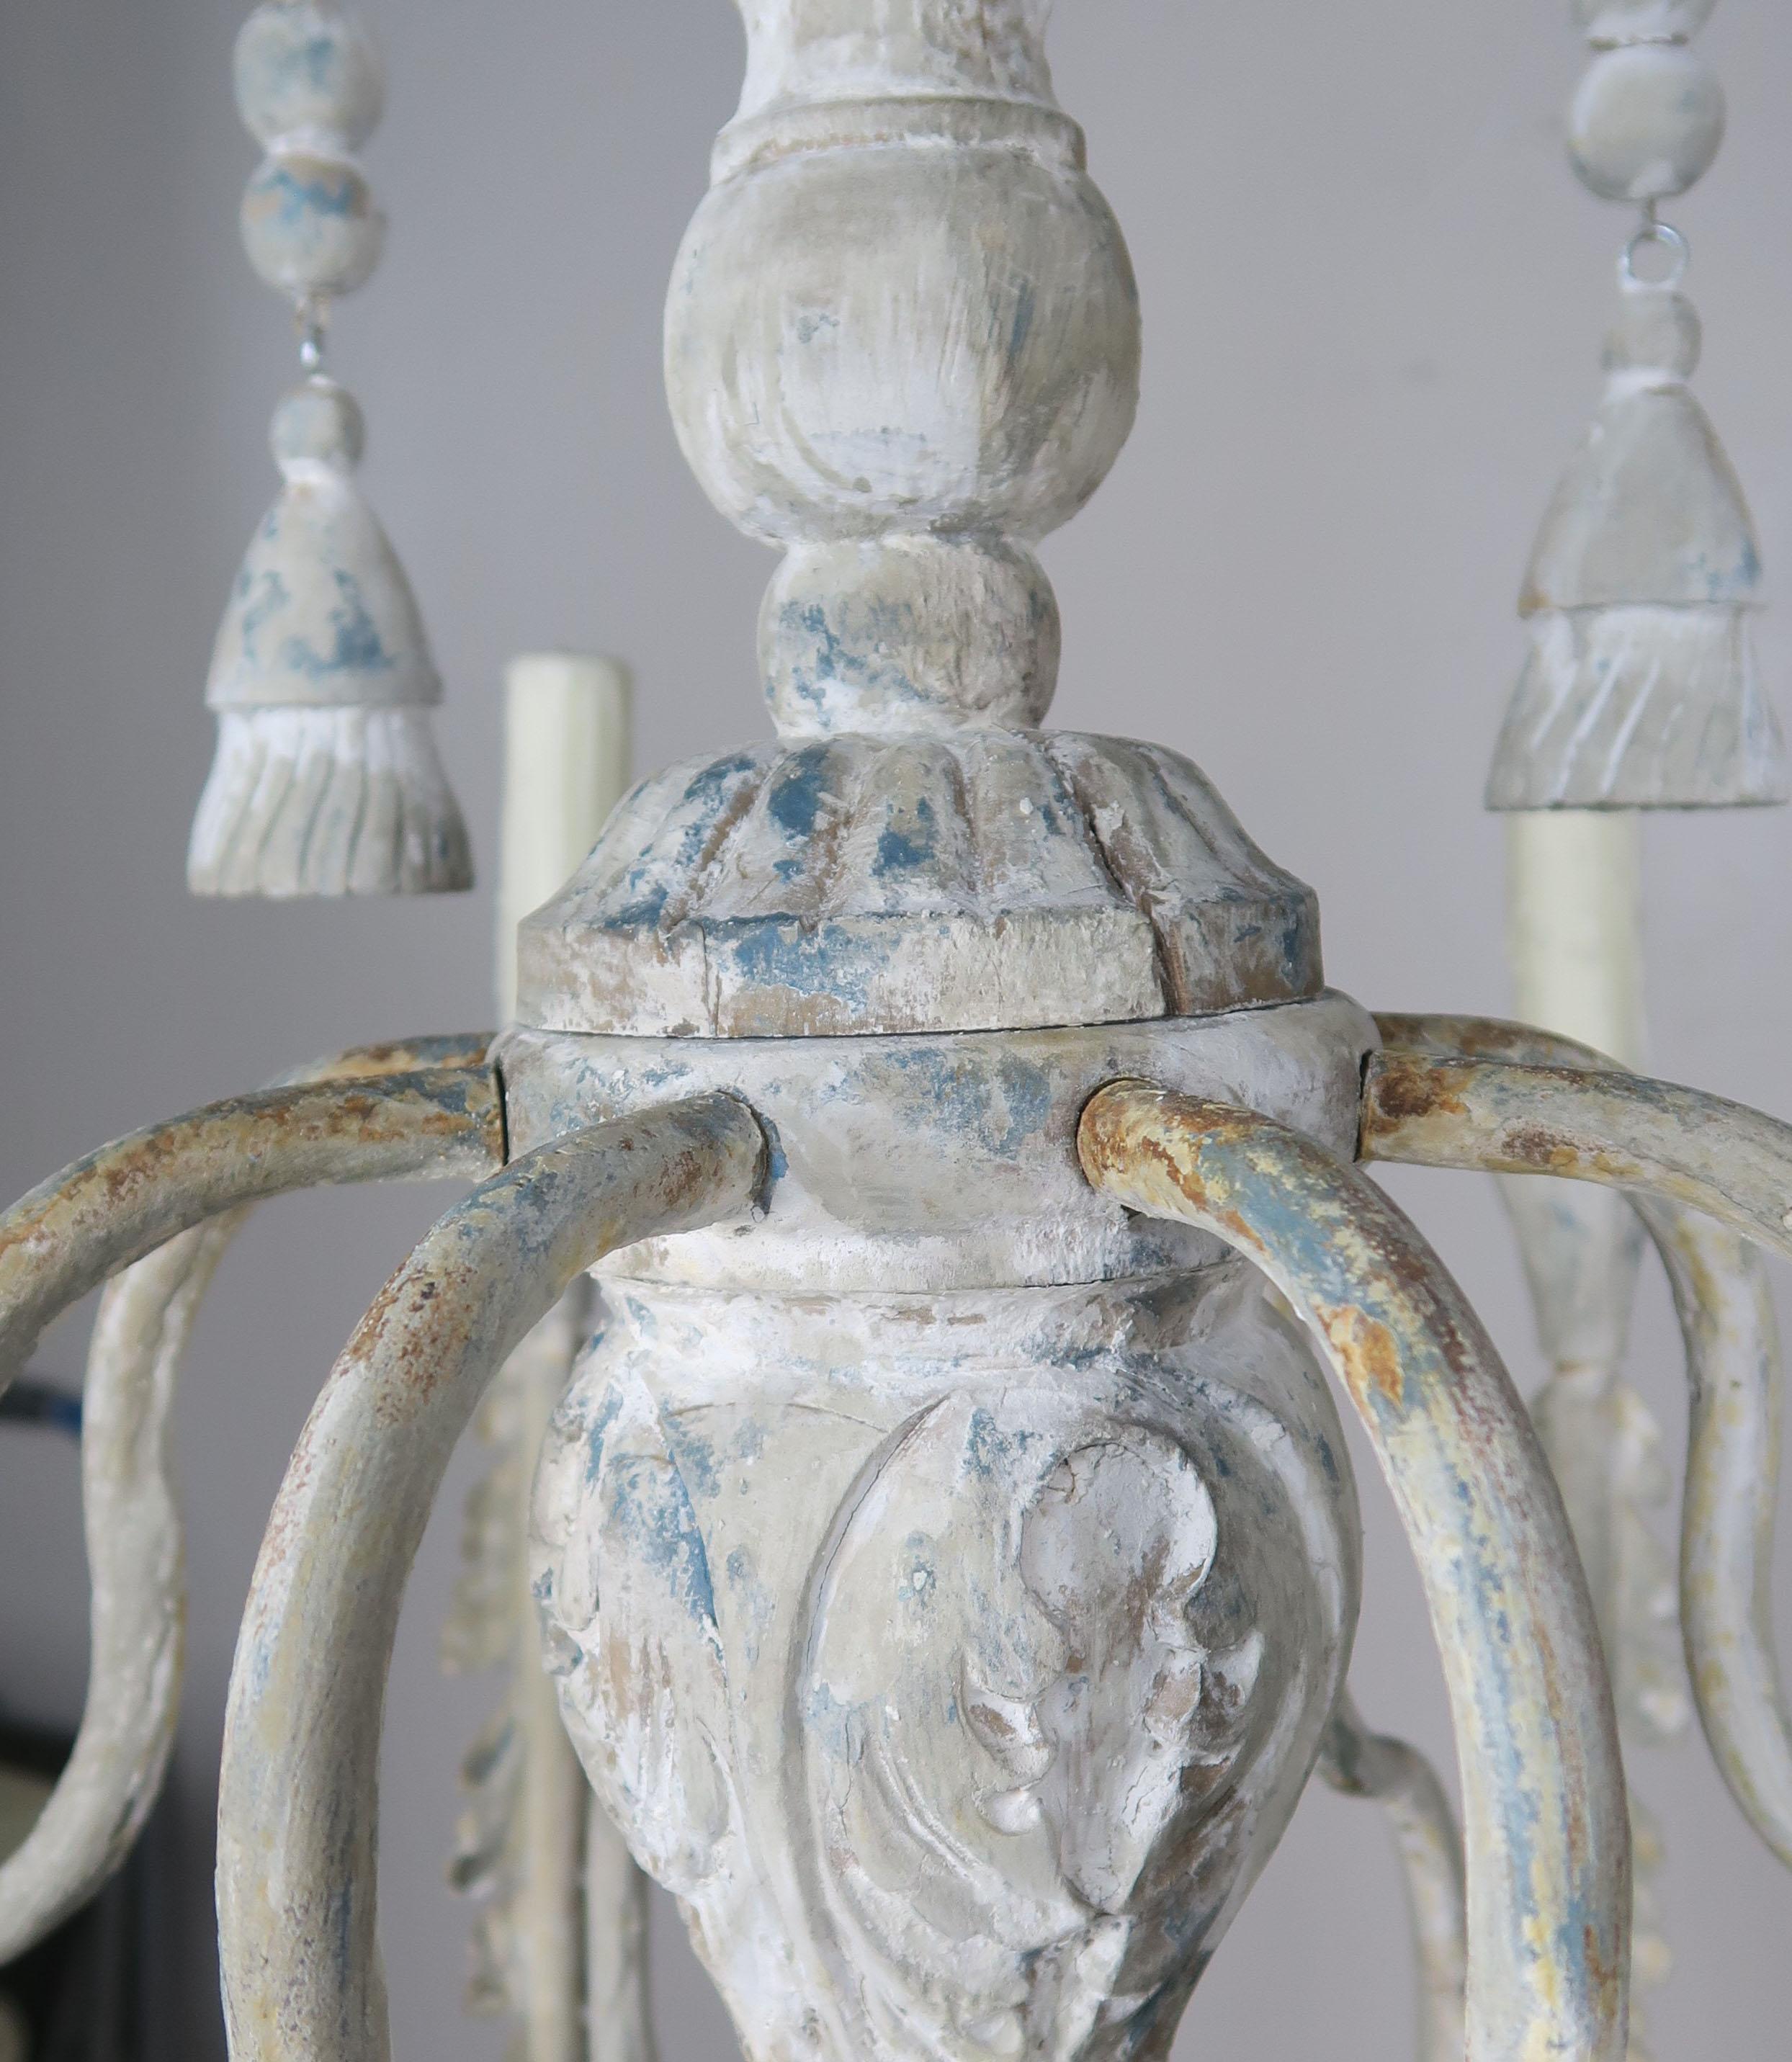 Hand-Painted 2-Tier Painted Cream Colored Chandeliers with Tassels by Melissa Levinson